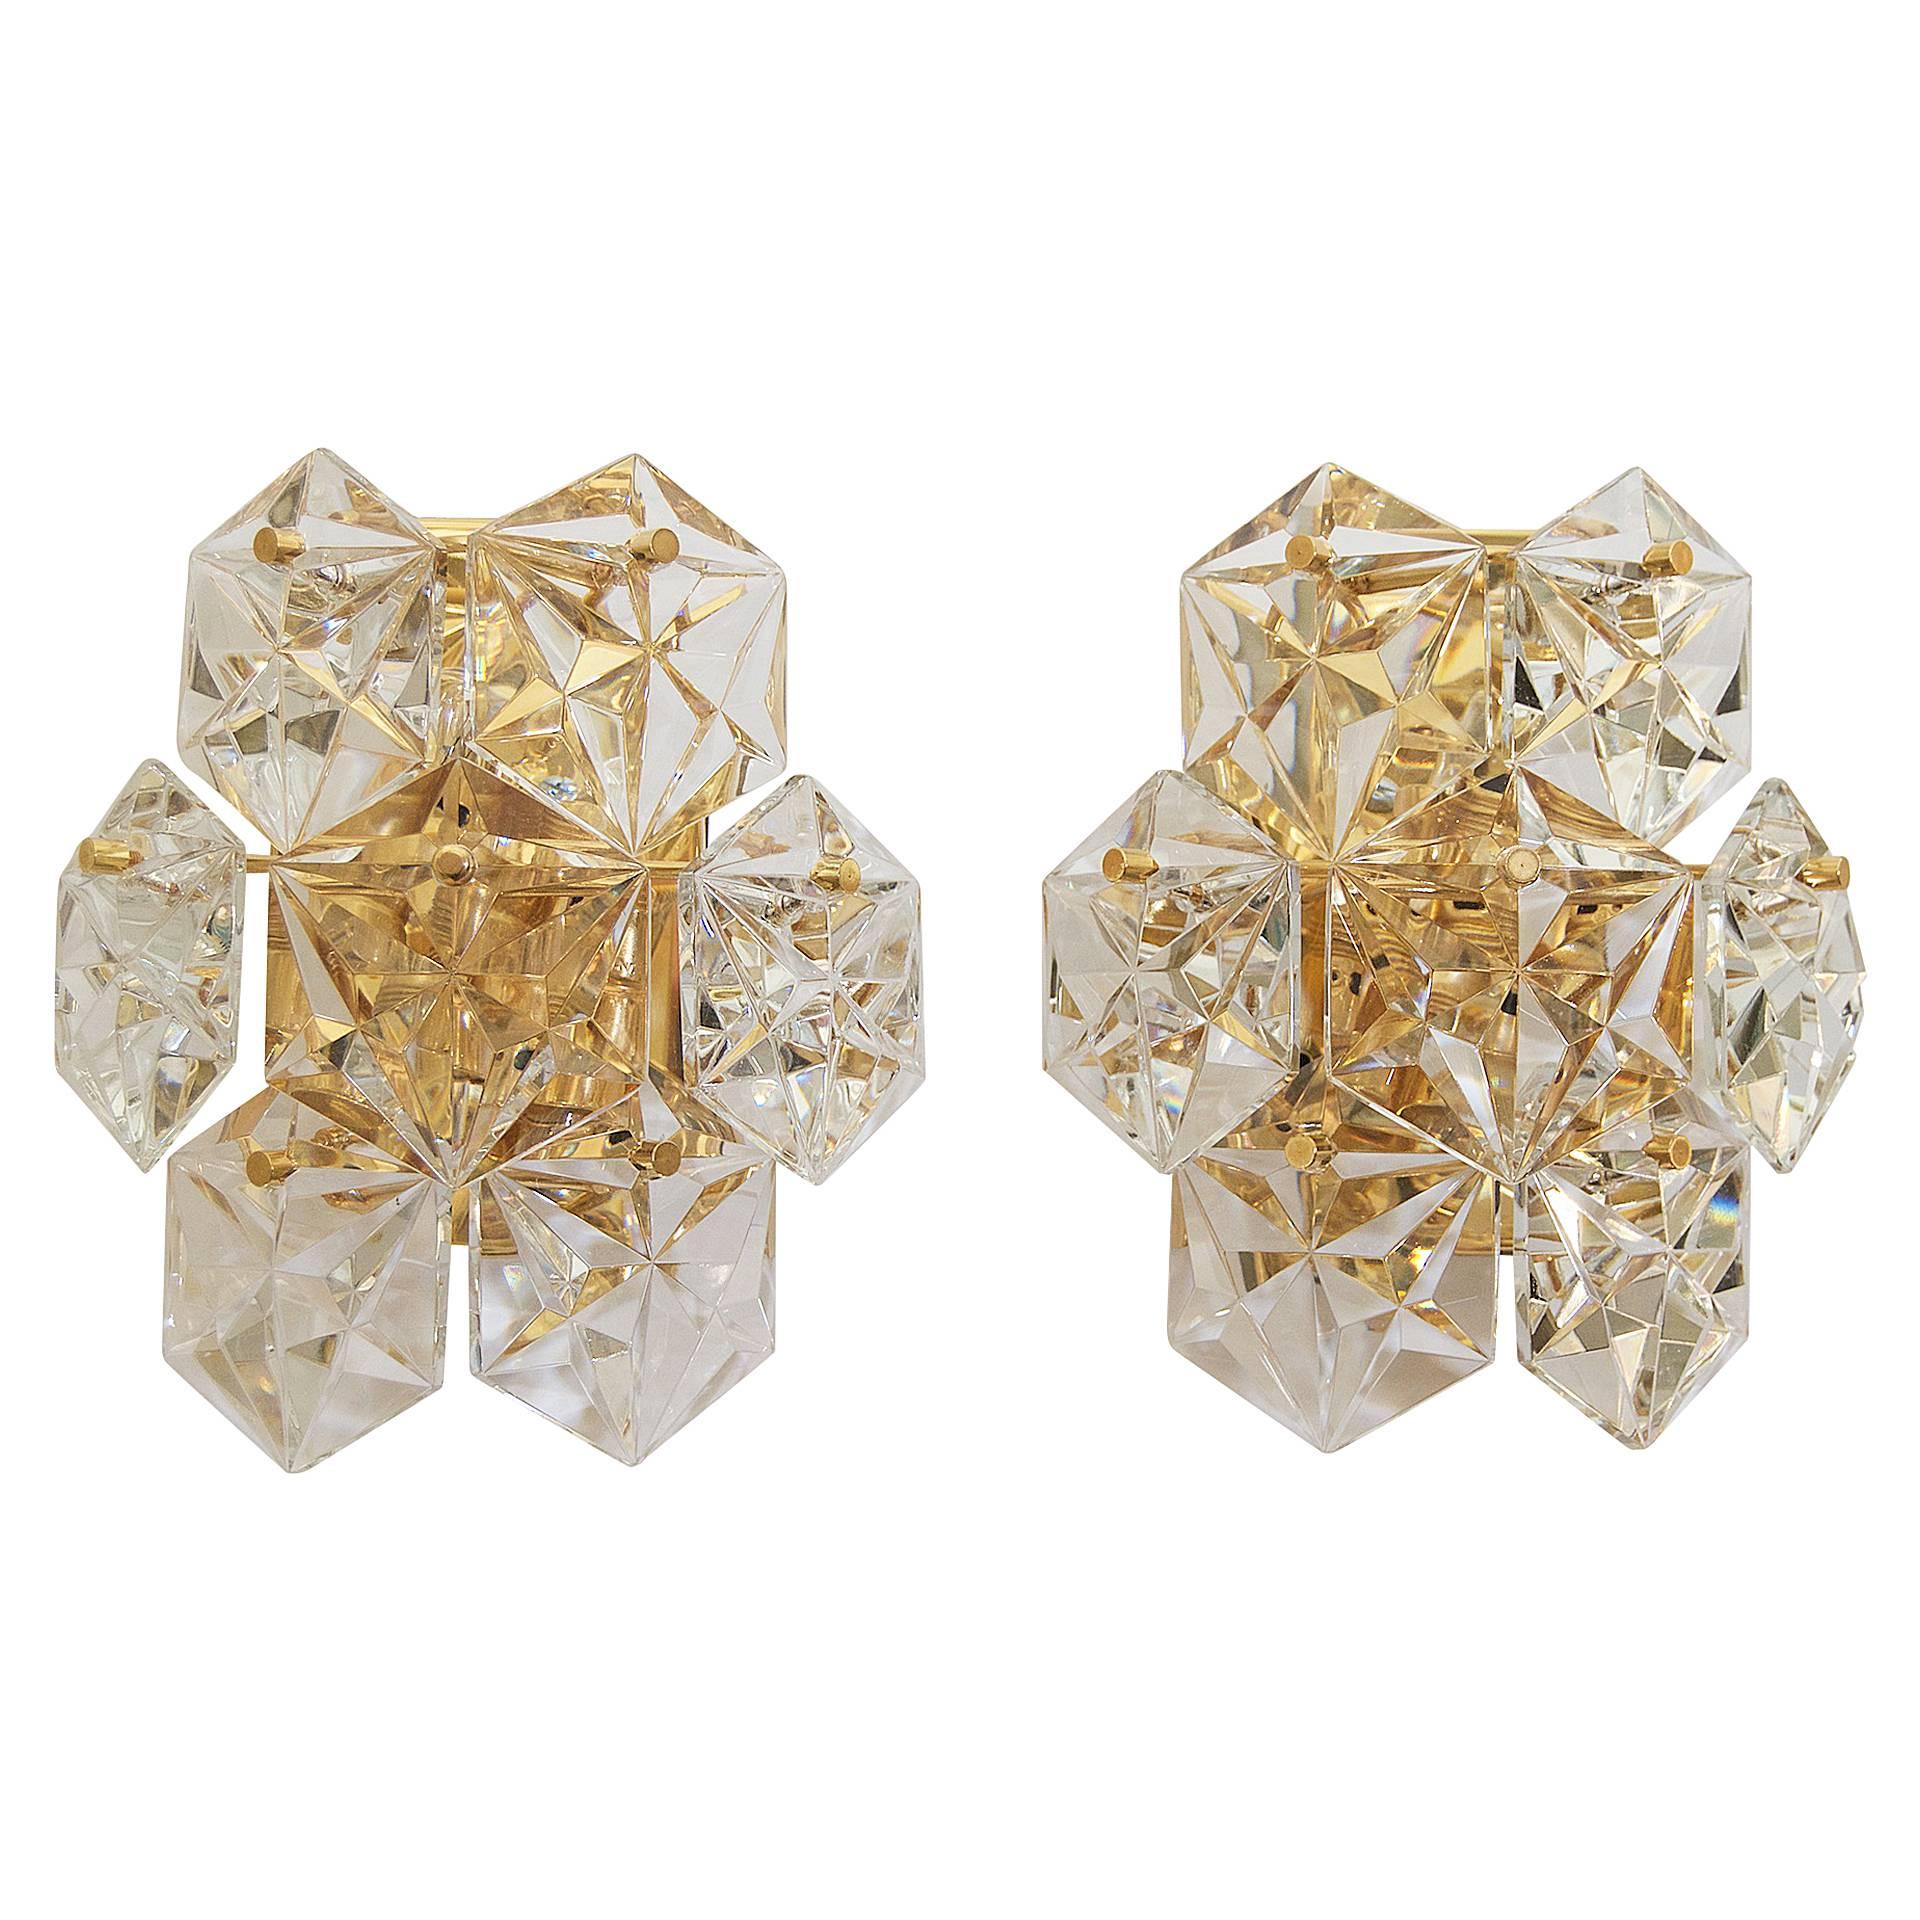 Kinkeldey Crystal Sconces with Gold Plate Fixture (3 Pairs Available)